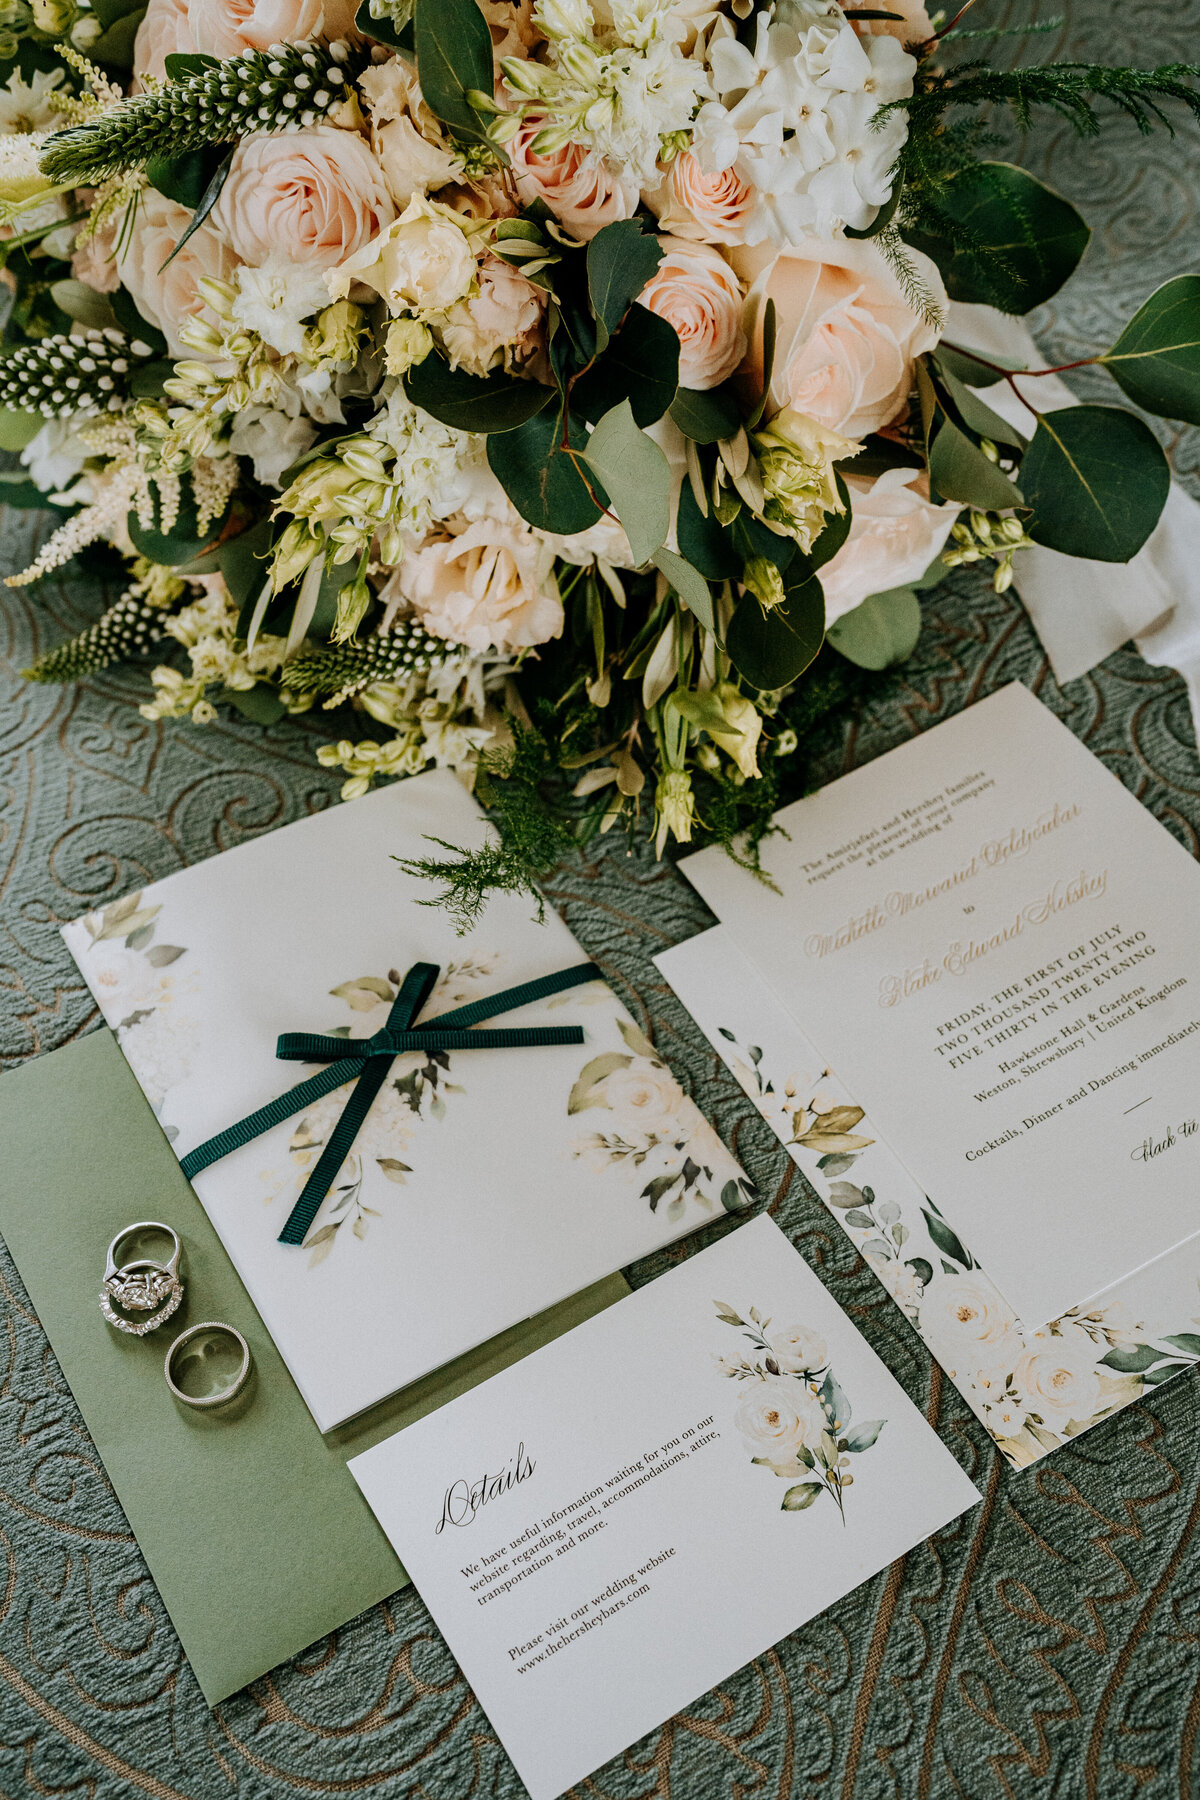 Floral invitation suite with vellum wrap detail and ribbon tie